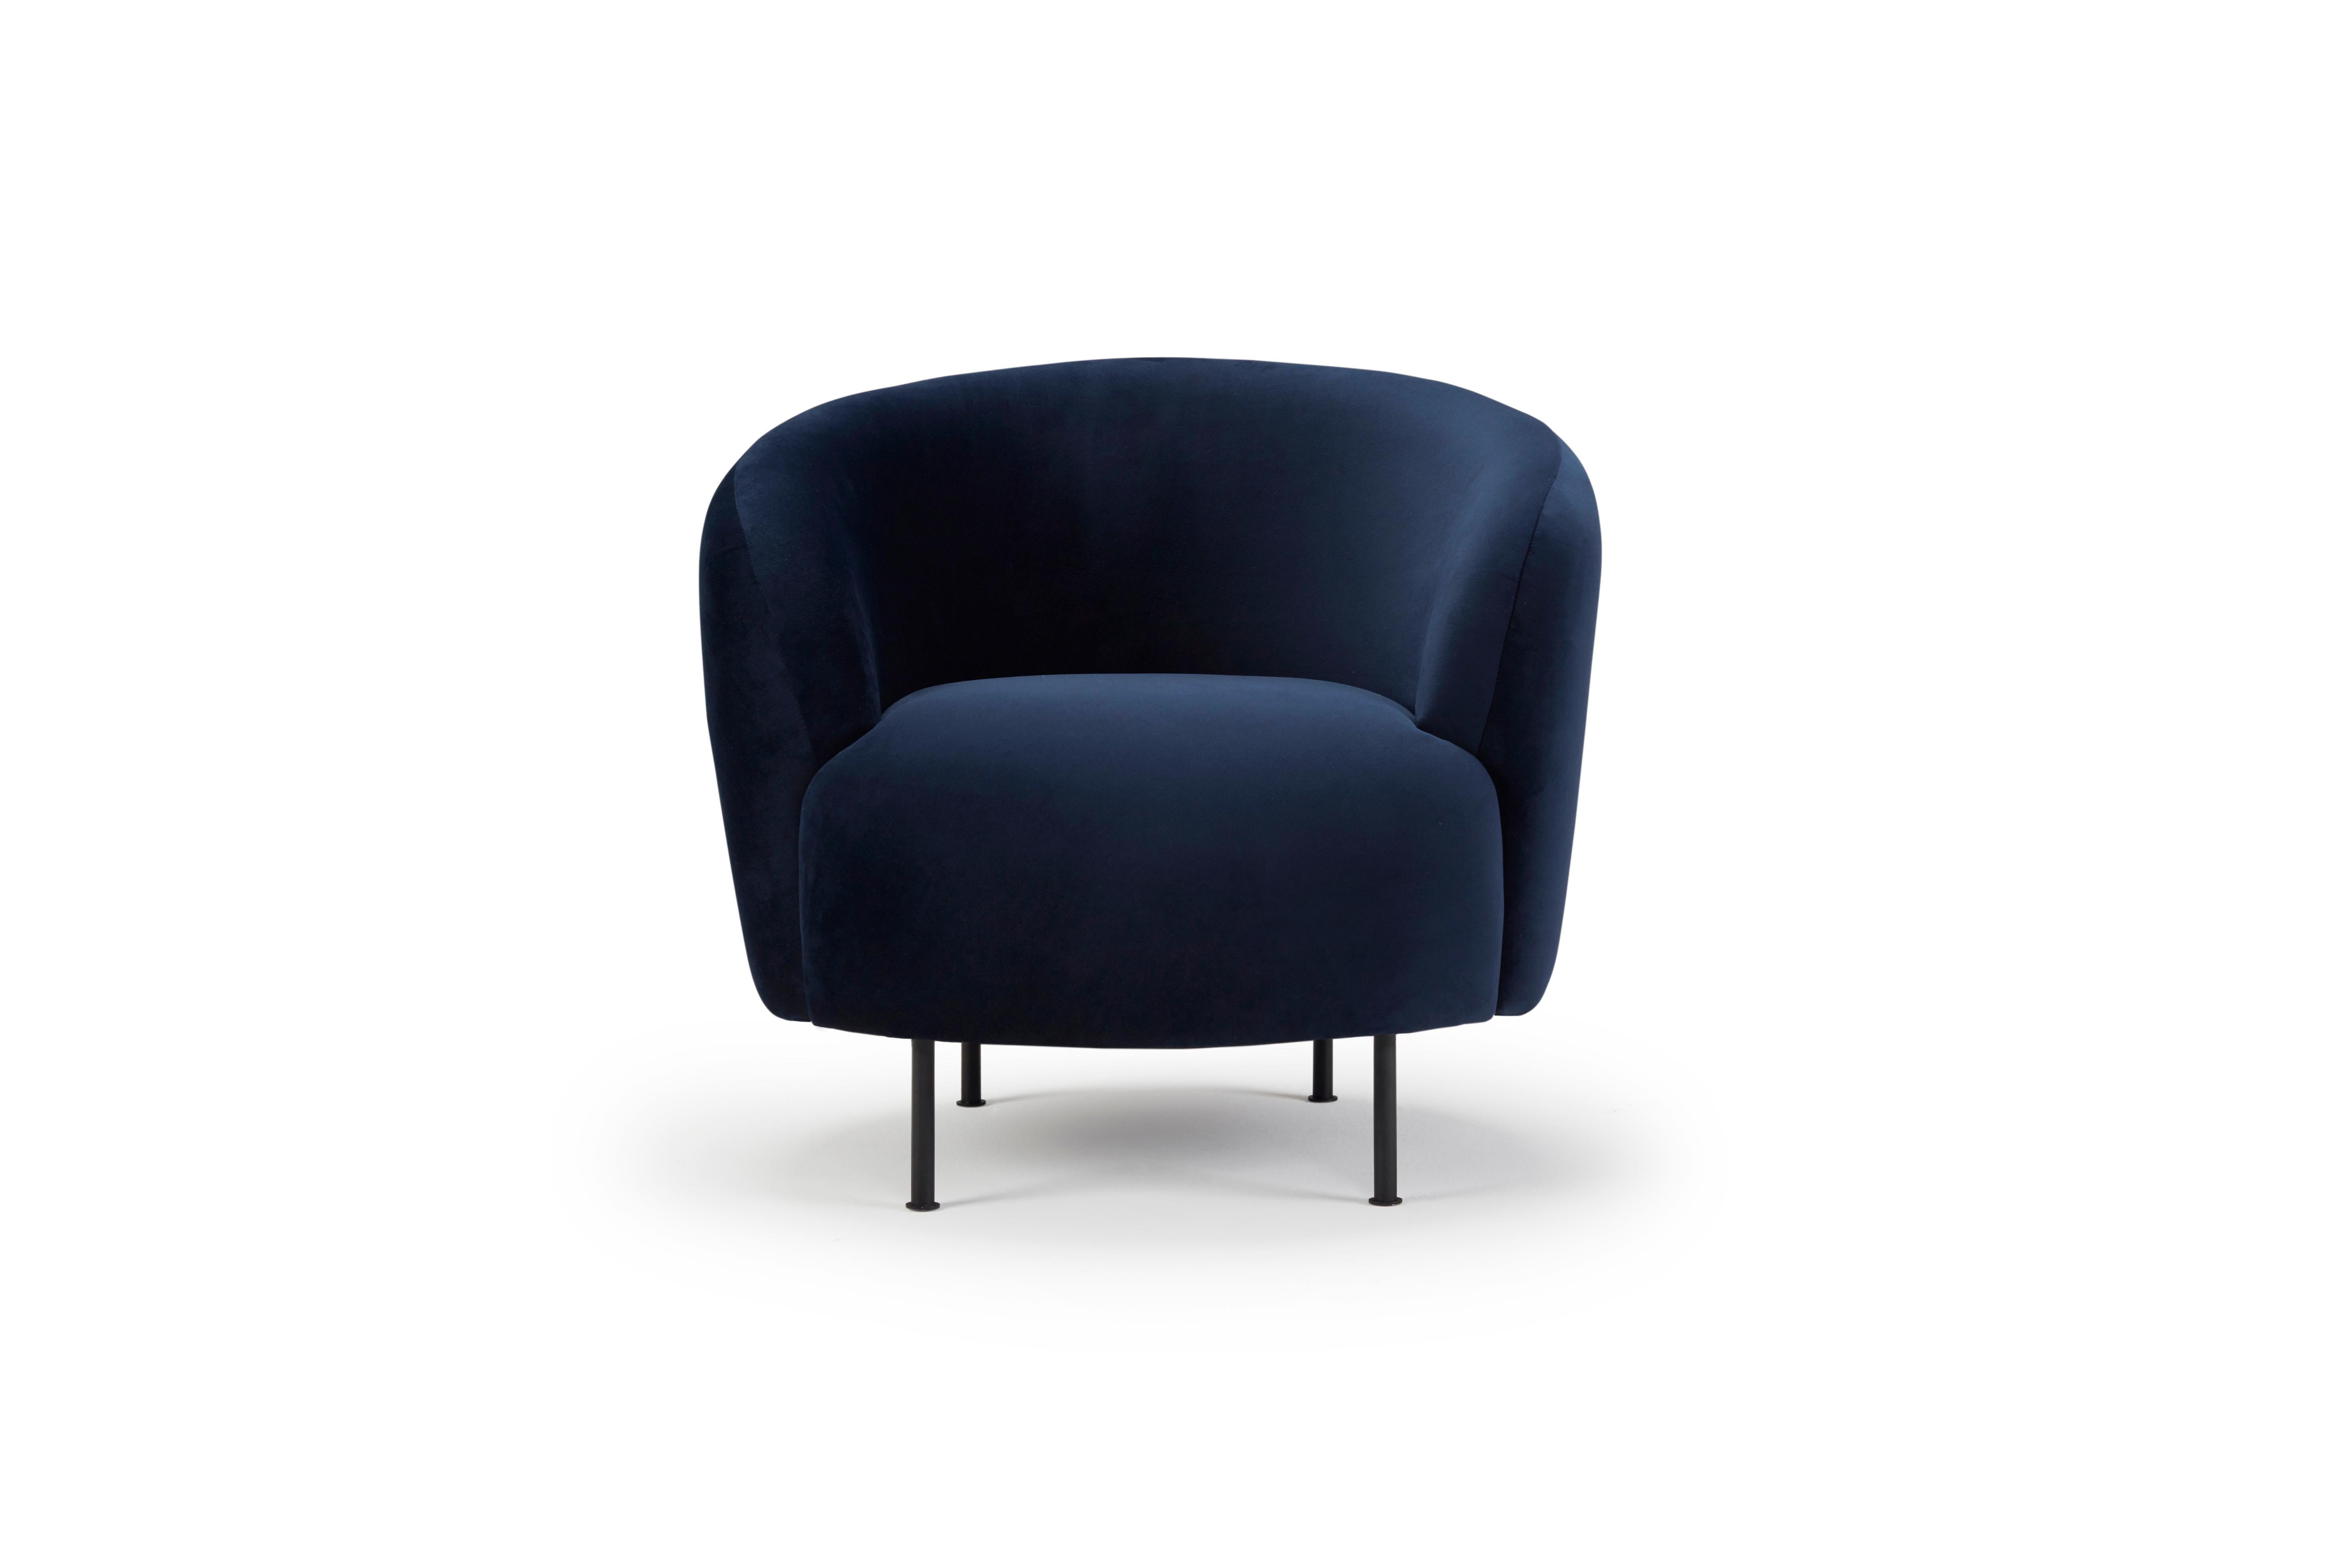 Luscious in its proportions but low key in terms of profile, the Glover is an OEM chair that is perfect for break out spaces and equally functional within hospitality as much as it is within a workplace setting.

Material - Black Metal Round Leg